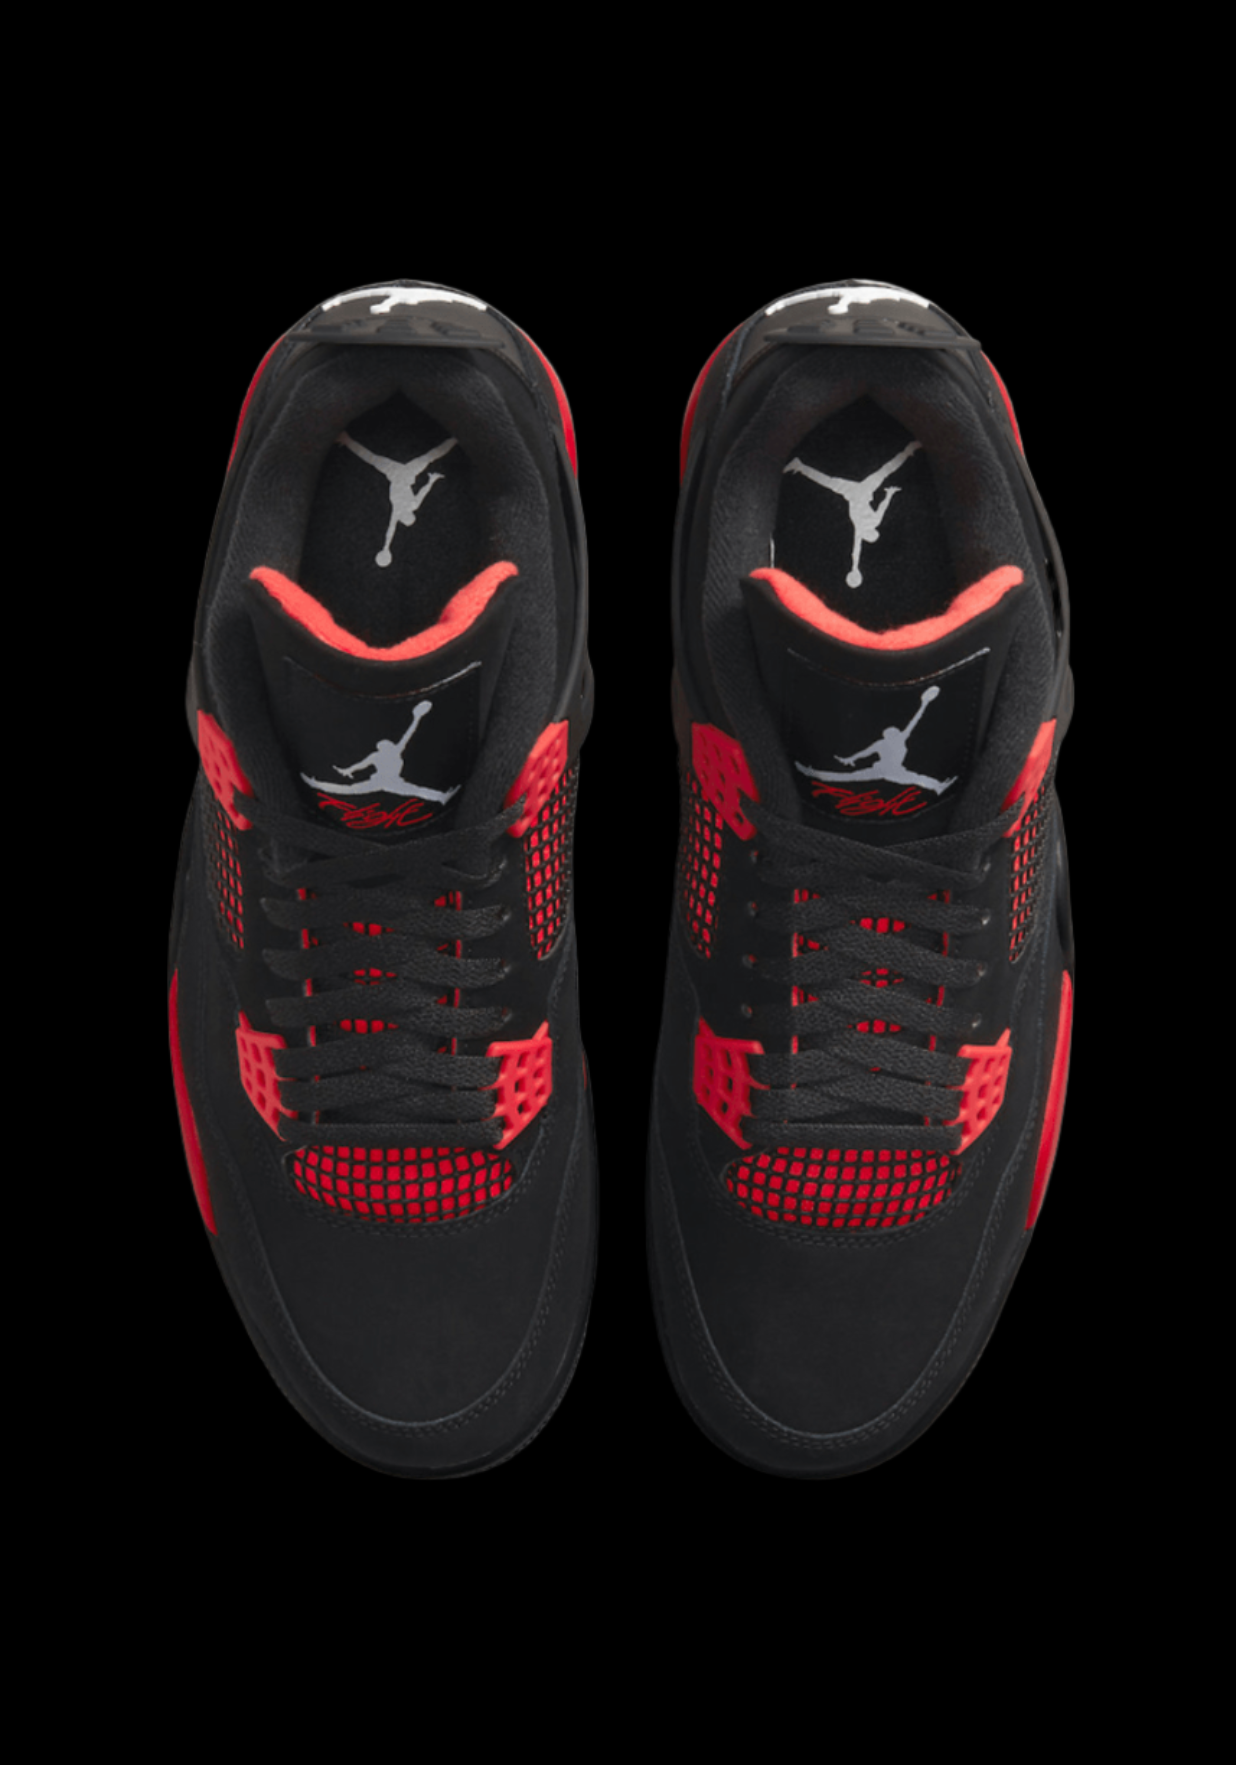 NIKE AIR JORDAN 4 RED THUNDER - The Flaire